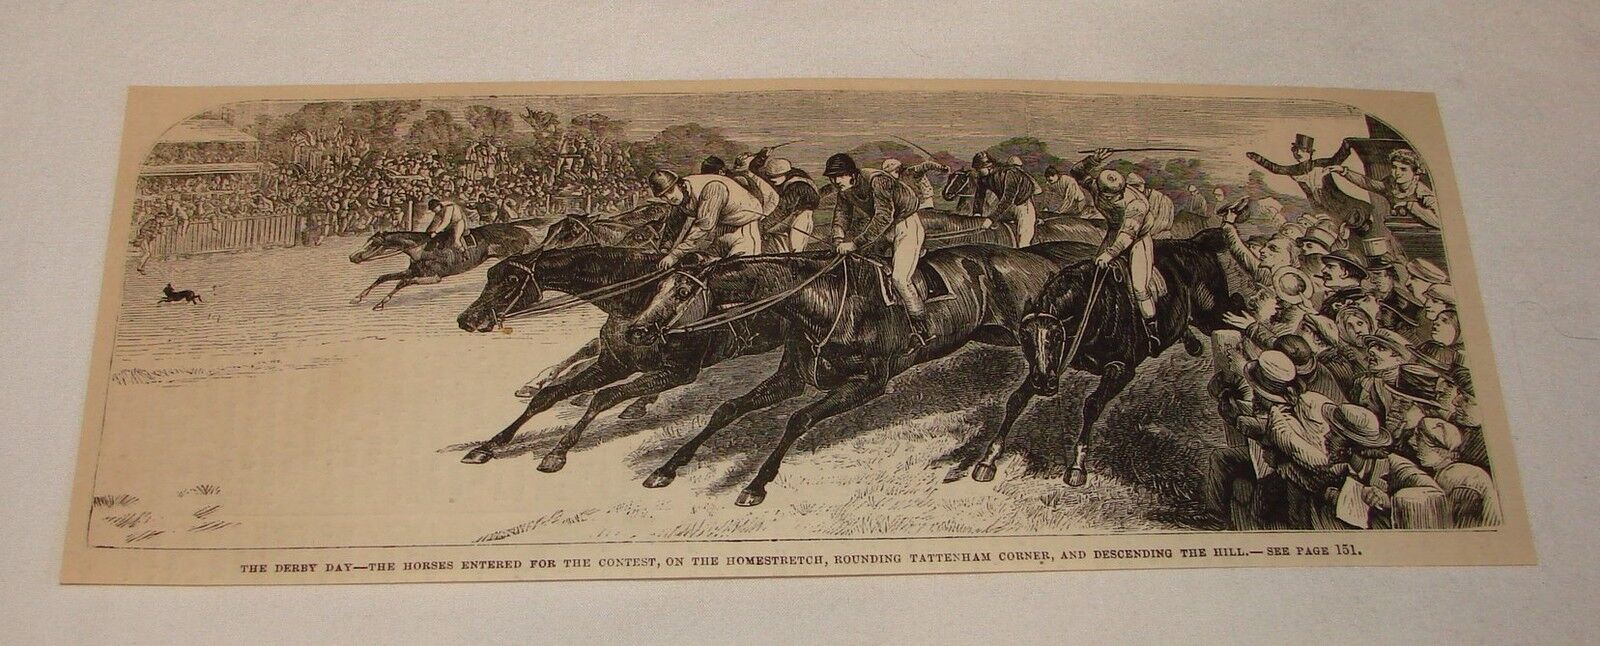 1879 magazine engraving ~ HORSES ENTERED FOR THE CONTEST